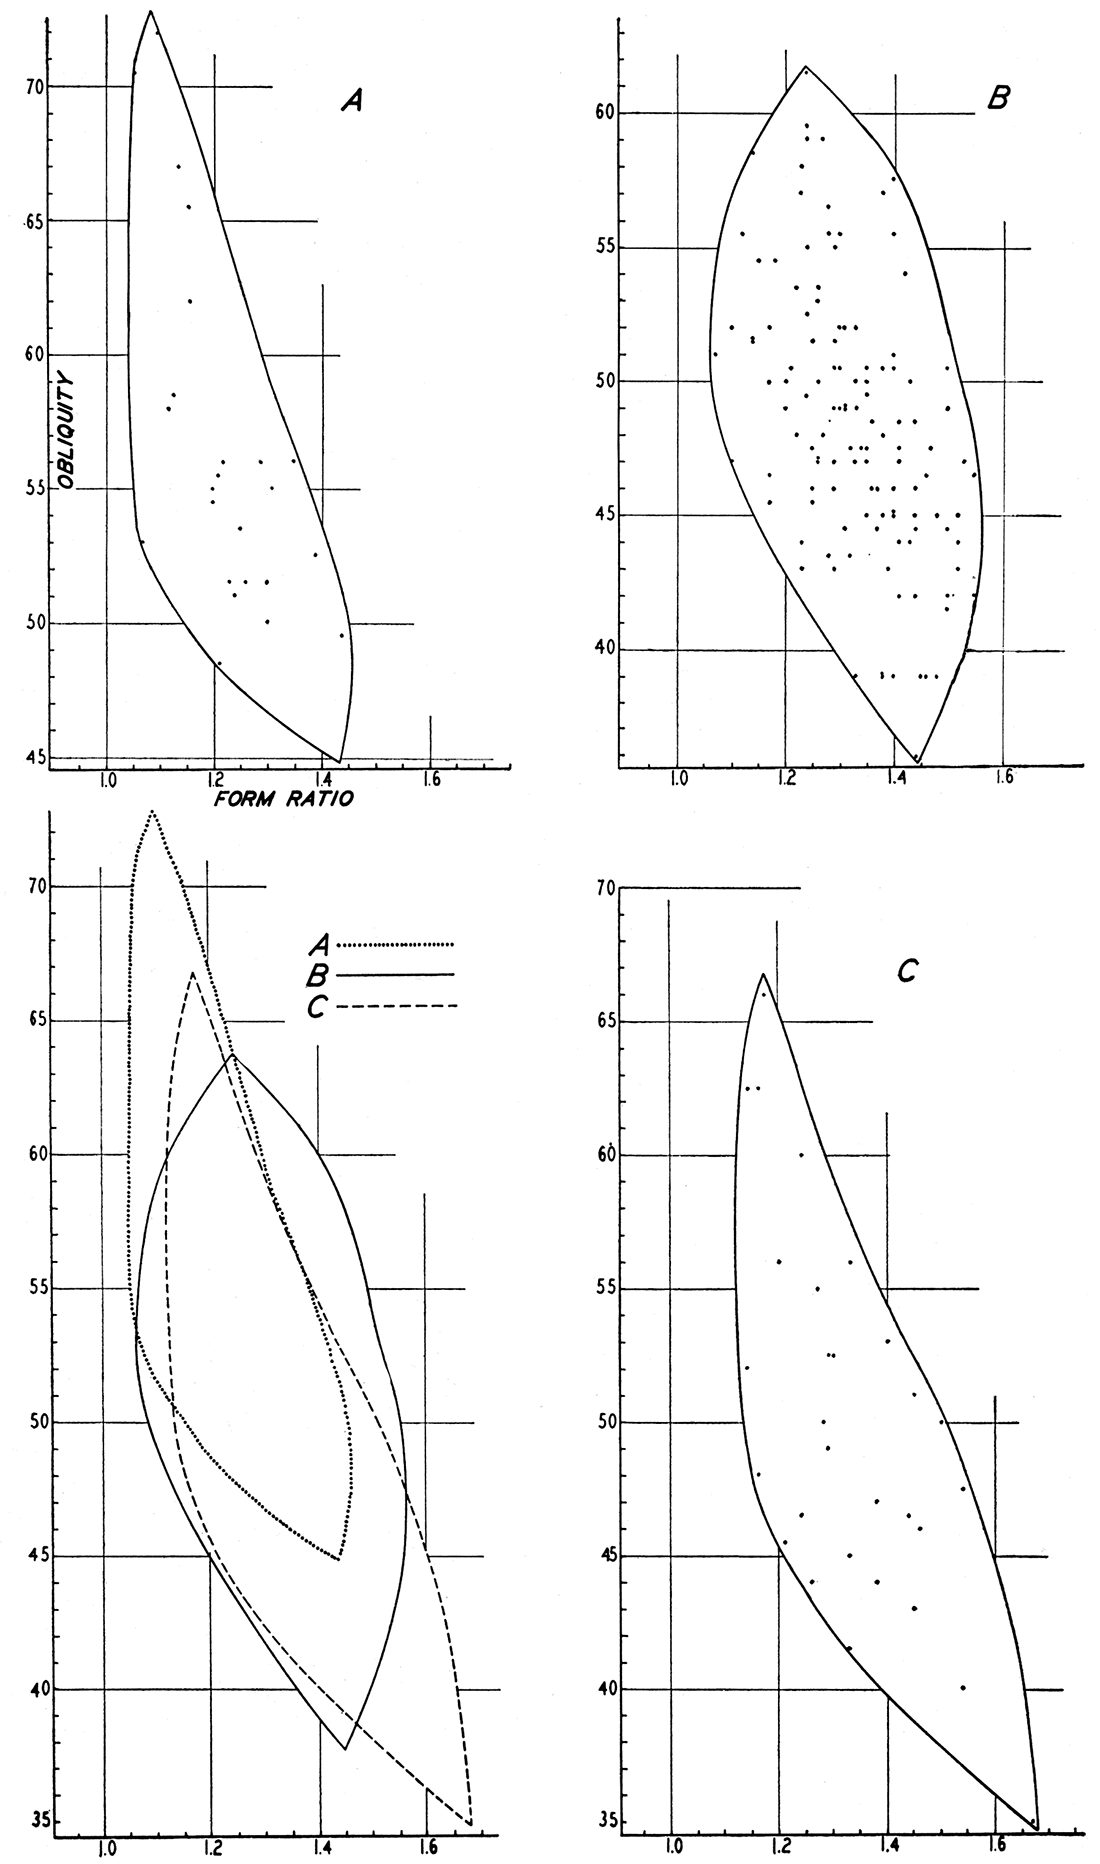 Scattergrams comparing shape in three forms of Promytilus. 